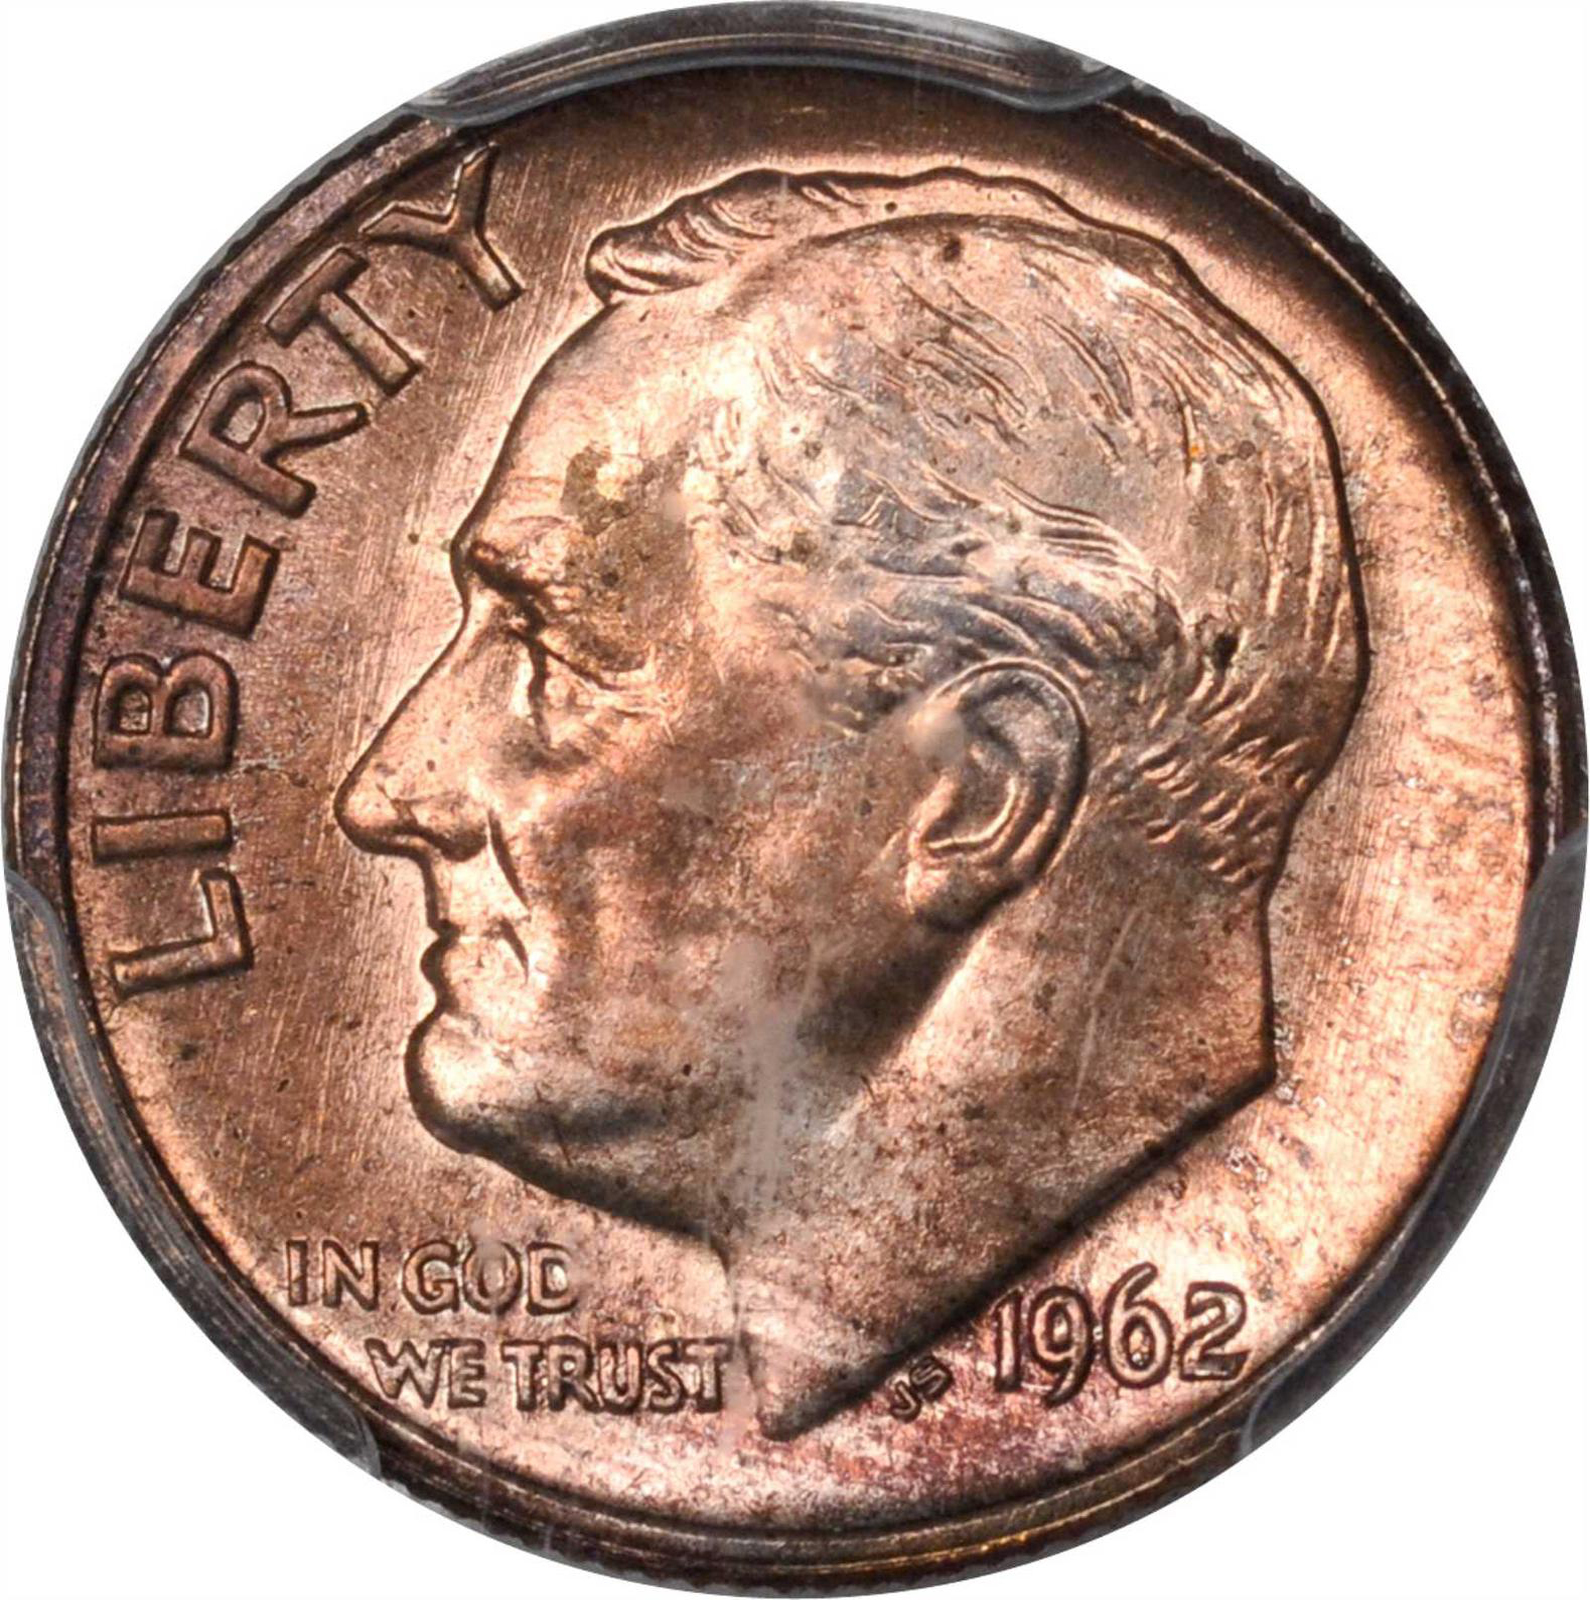 Value of 1962 Dime Sell and Auction, Rare Coin Buyers